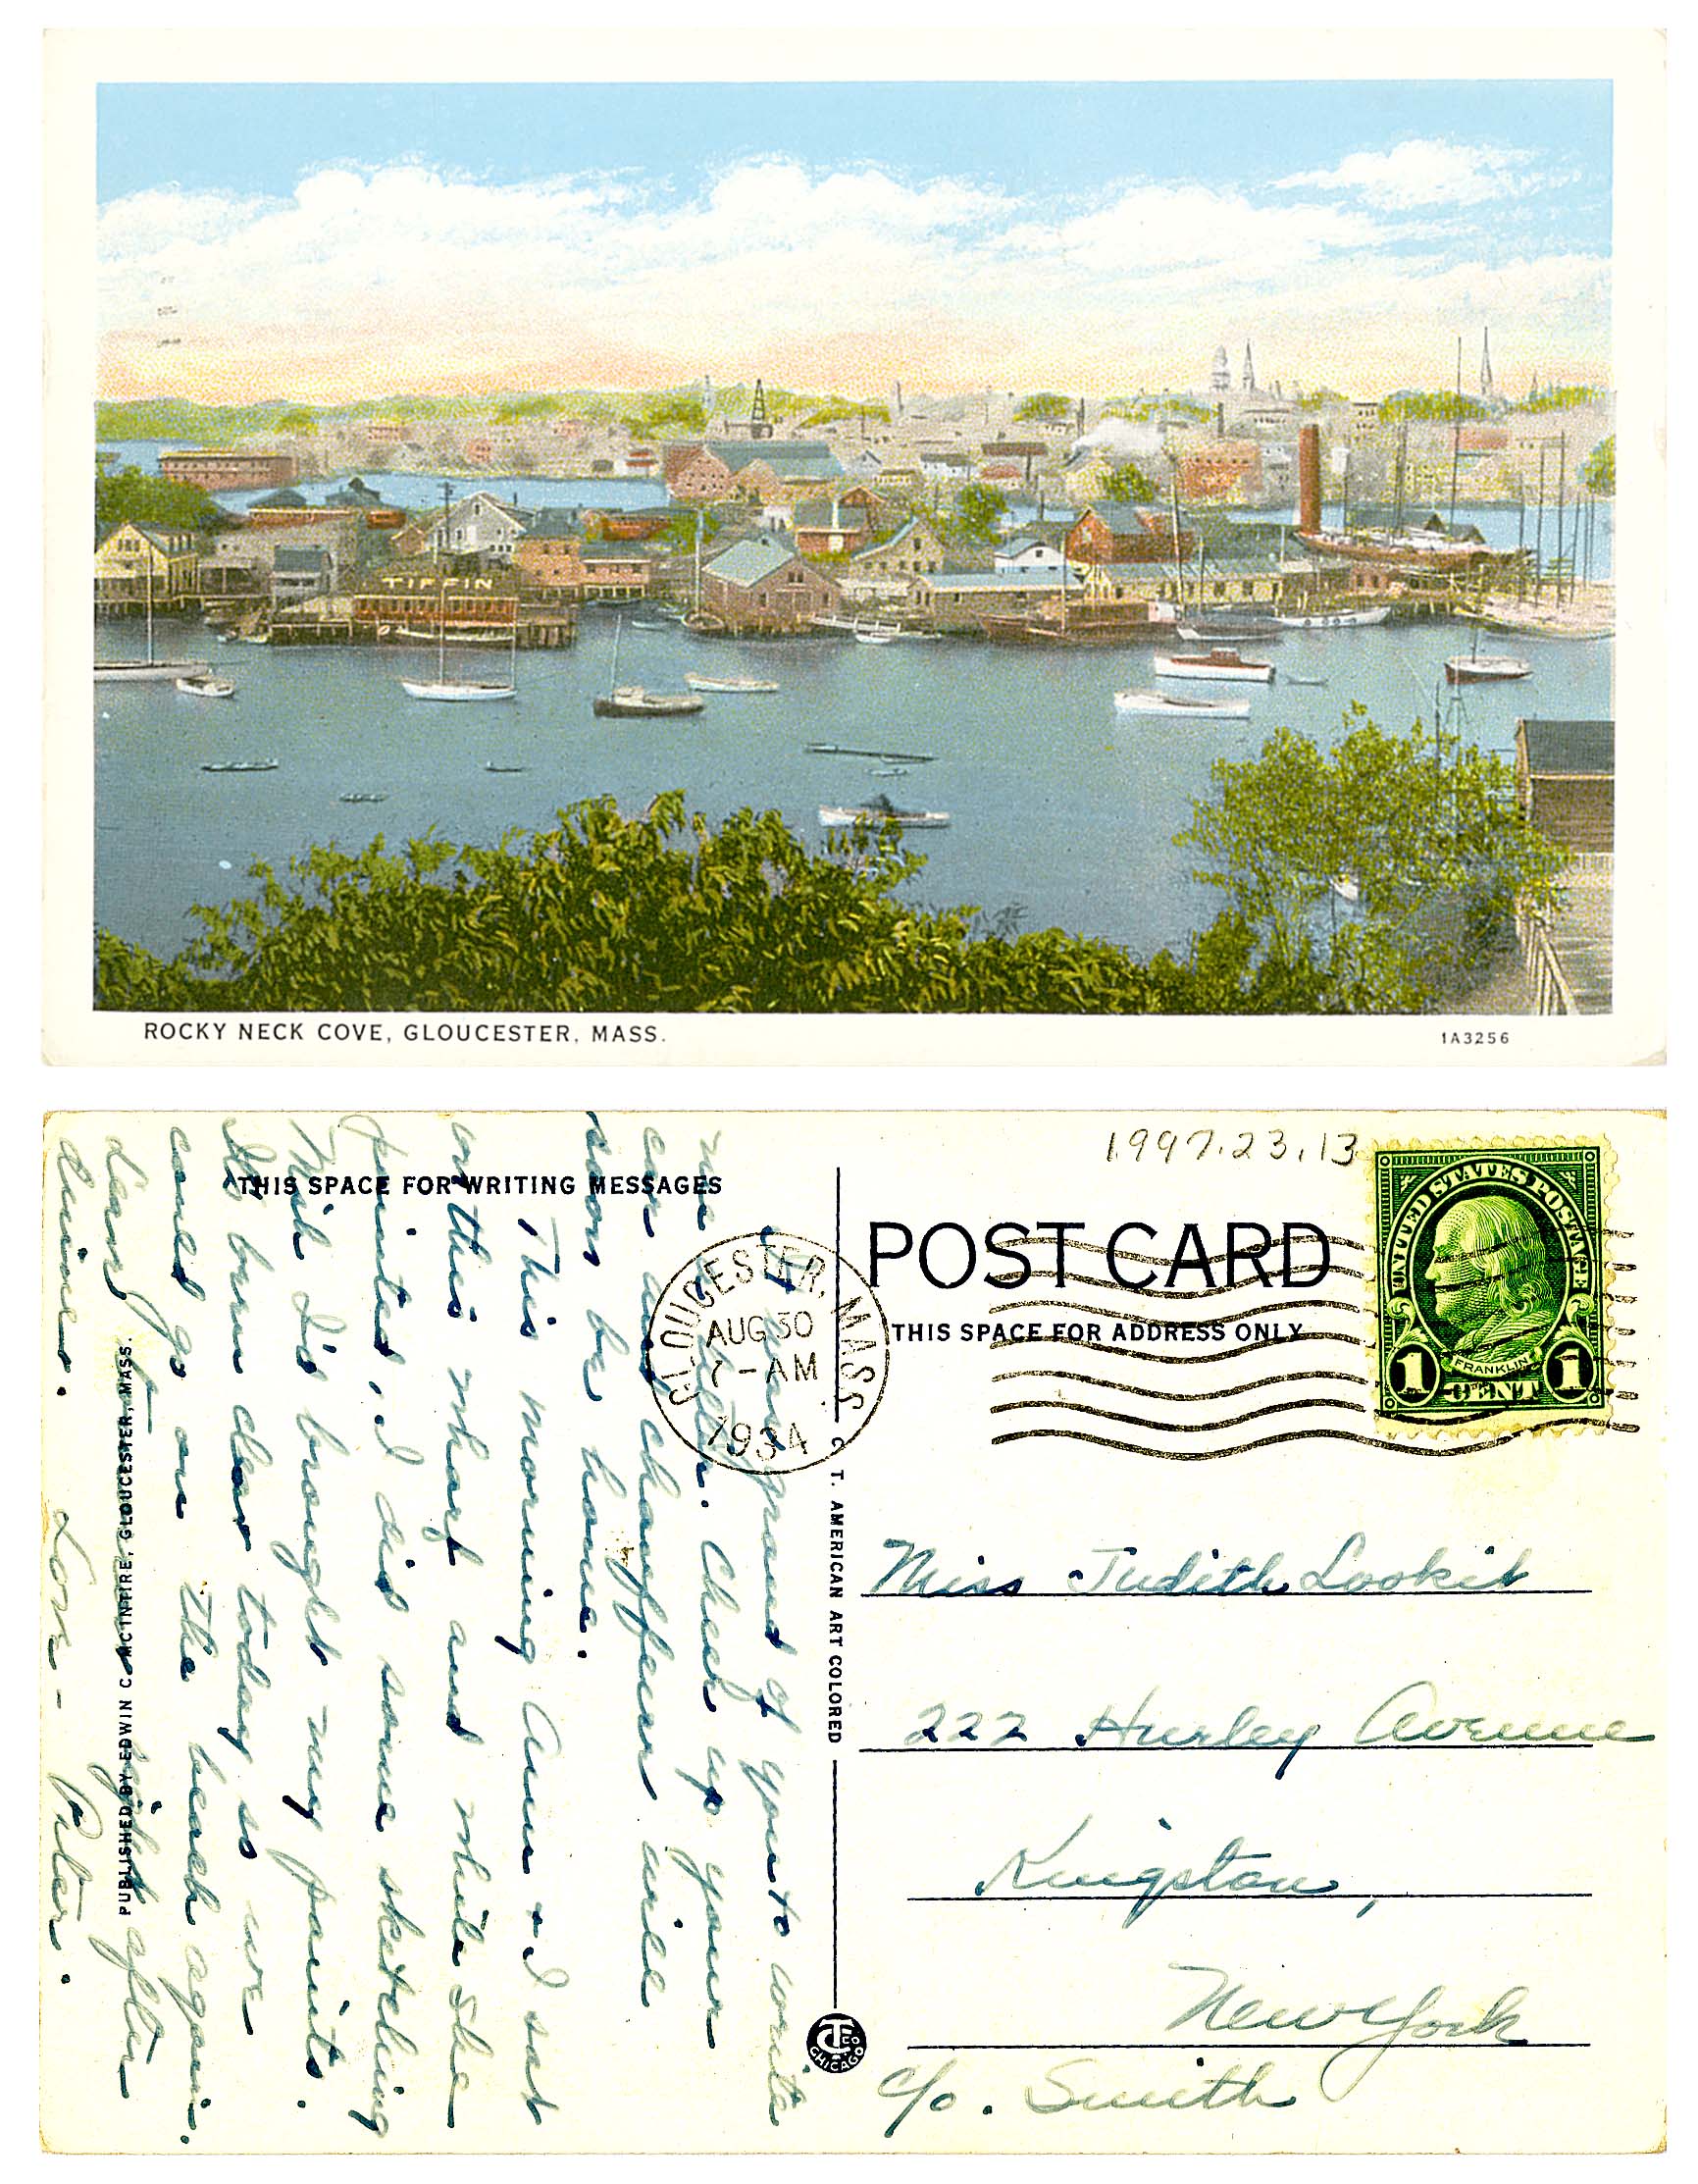 Postcard from the 1930s